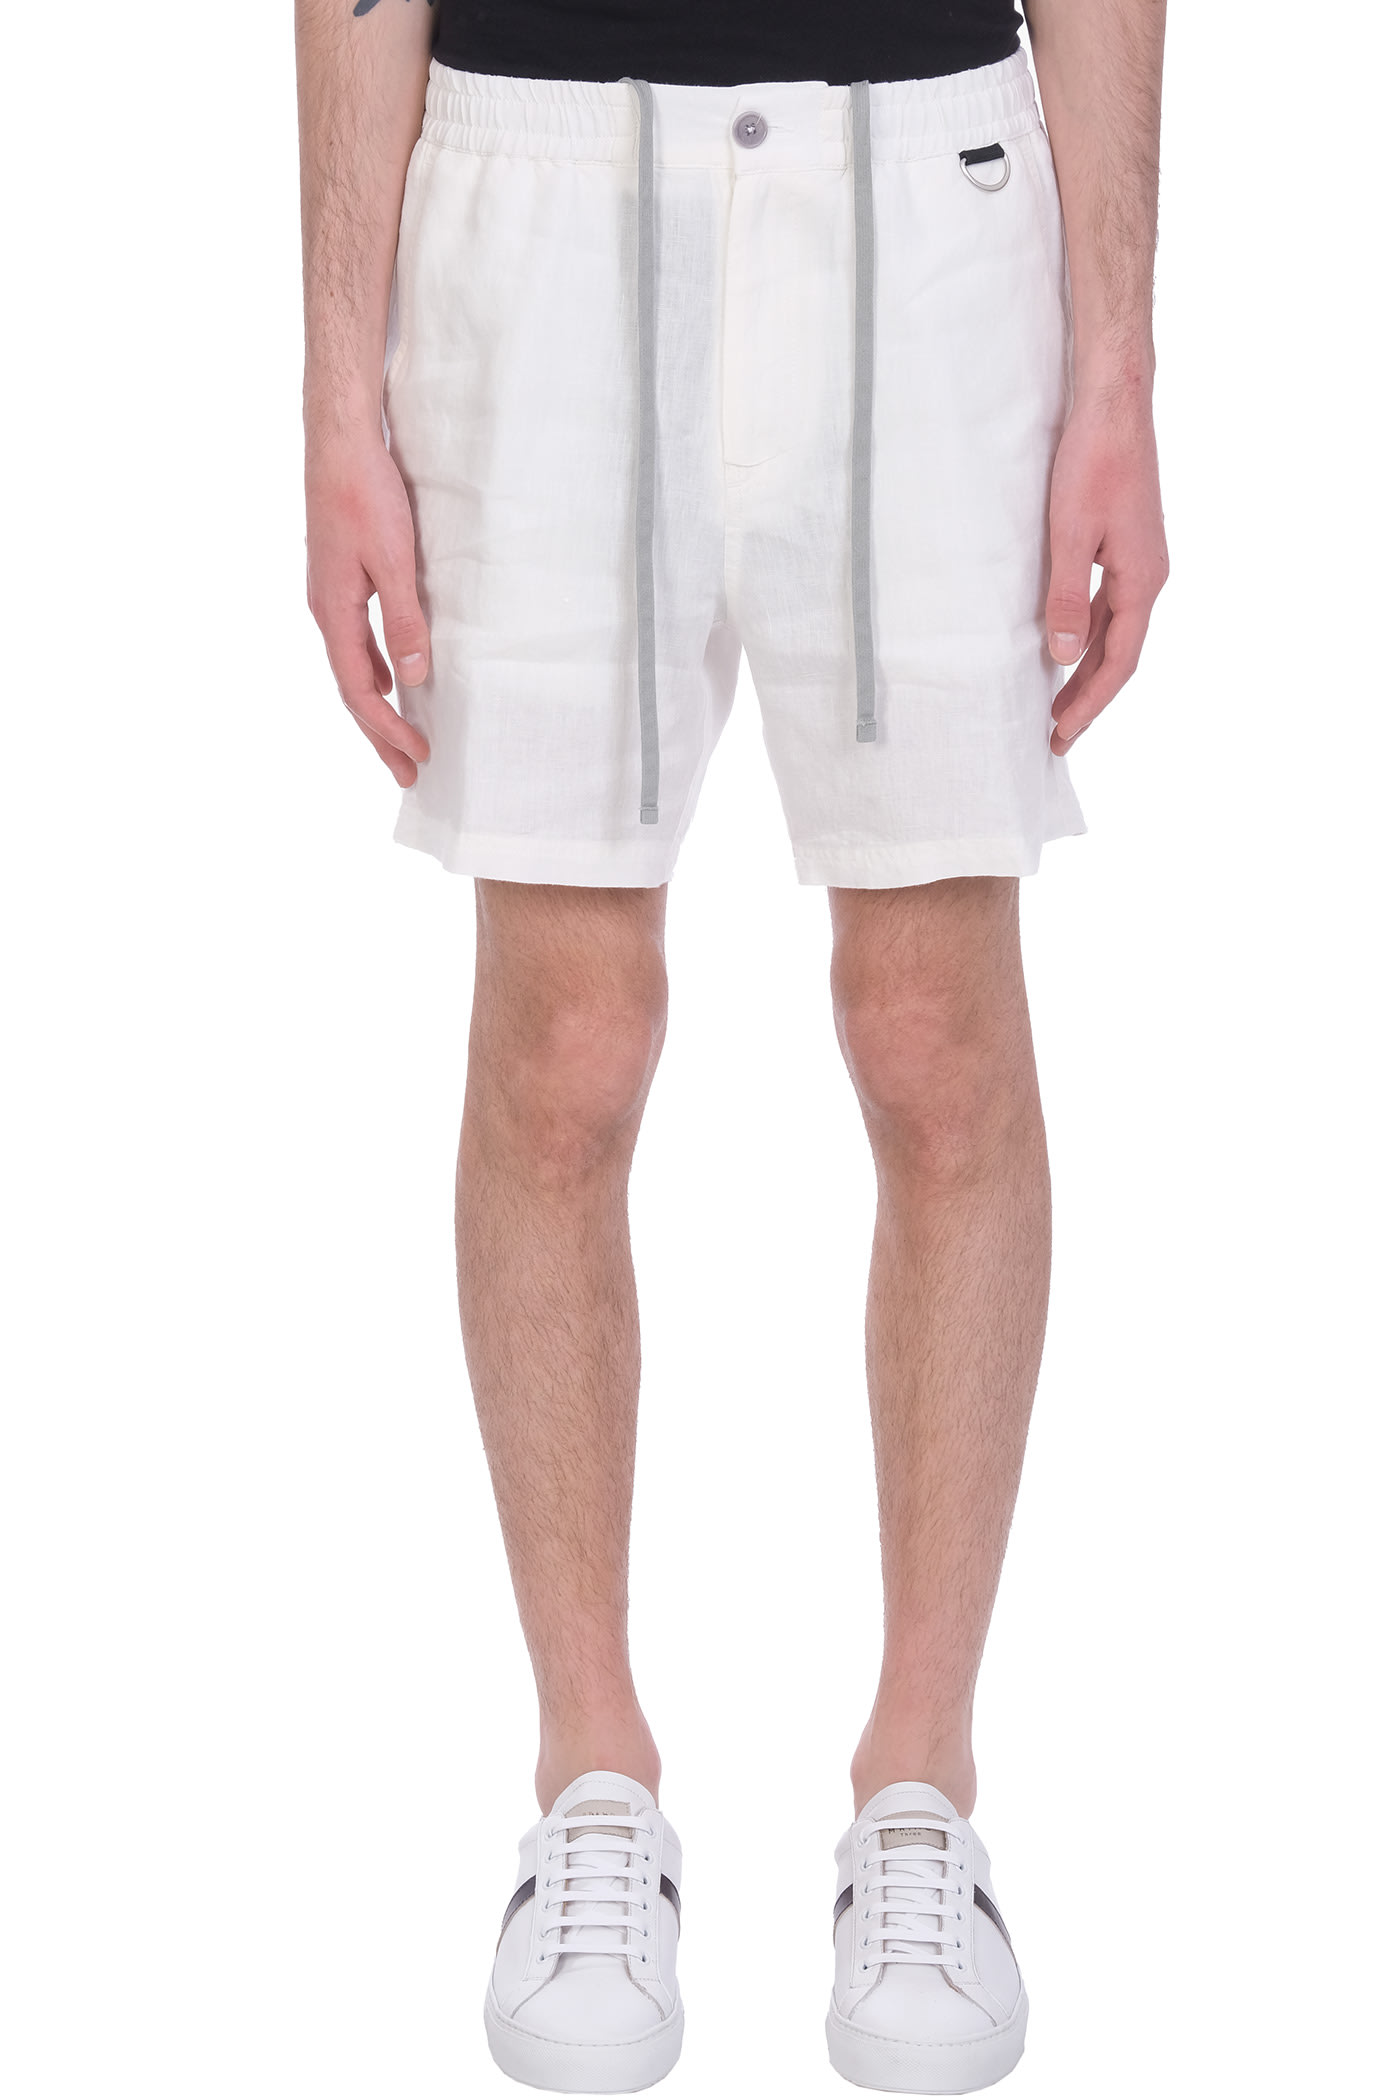 Low Brand Taylor Shorts In White Linen